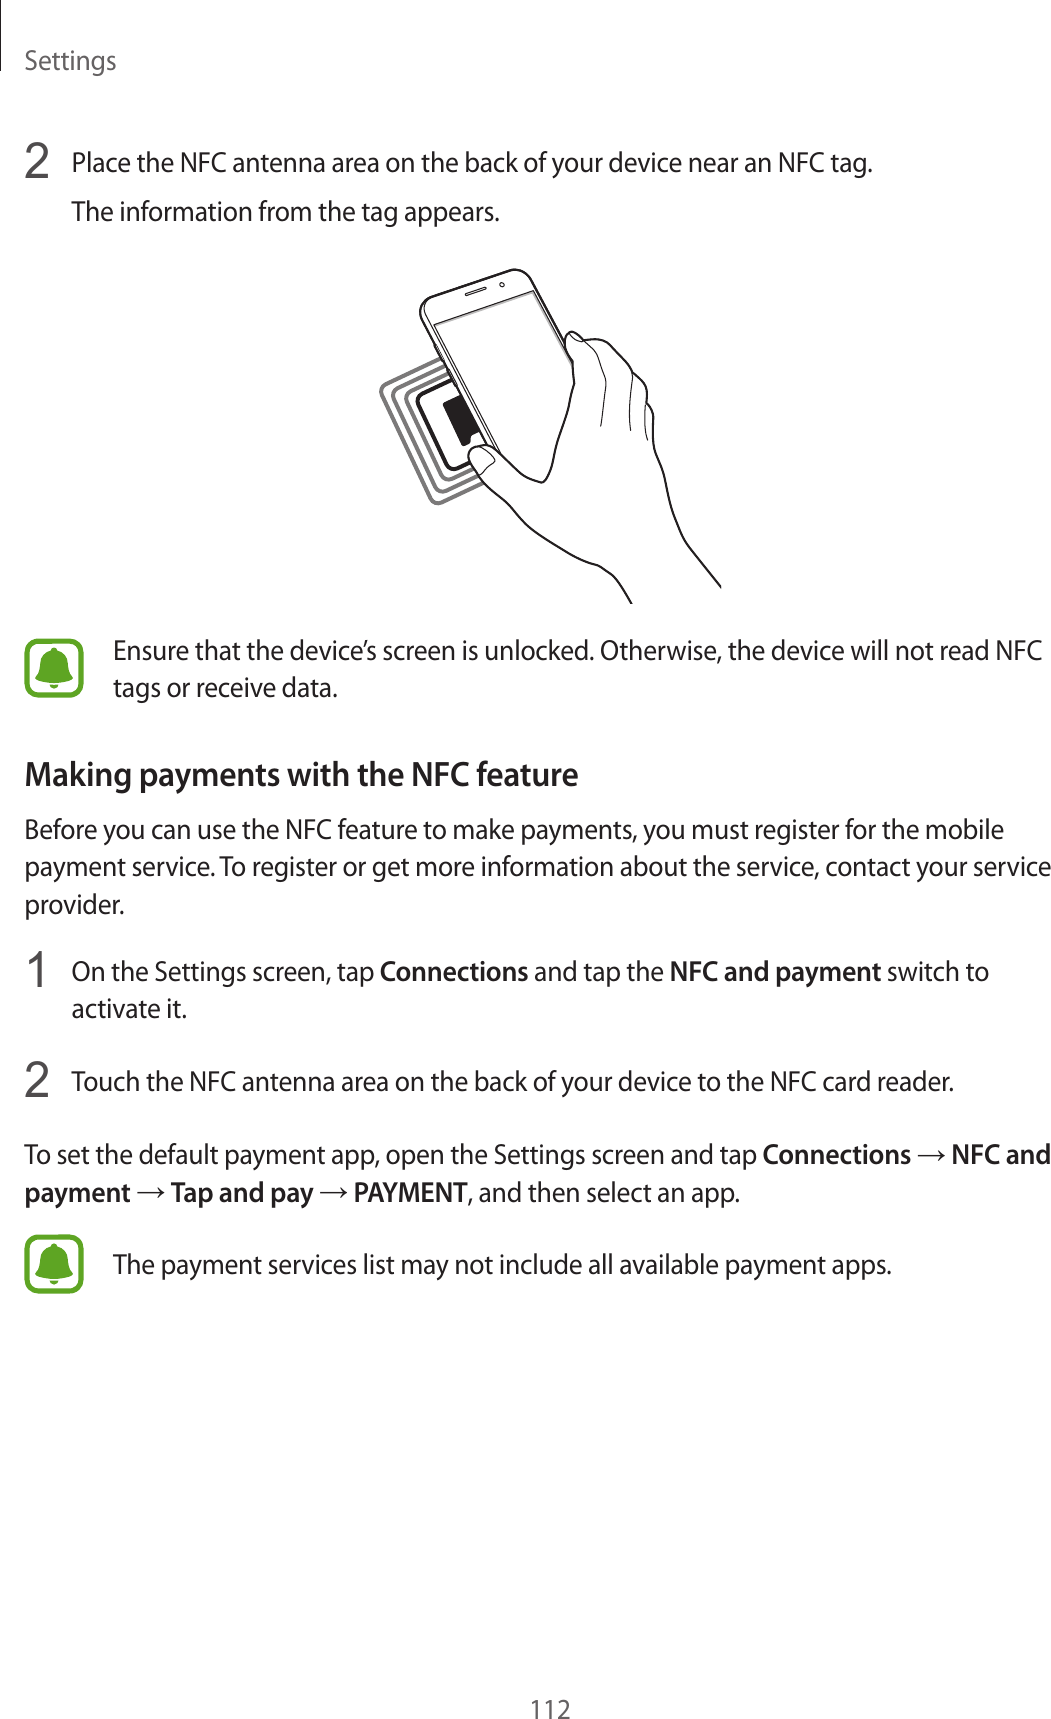 Settings1122  Place the NFC antenna area on the back of your device near an NFC tag.The information from the tag appears.Ensure that the device’s screen is unlocked. Otherwise, the device will not read NFC tags or receive data.Making payments with the NFC featureBefore you can use the NFC feature to make payments, you must register for the mobile payment service. To register or get more information about the service, contact your service provider.1  On the Settings screen, tap Connections and tap the NFC and payment switch to activate it.2  Touch the NFC antenna area on the back of your device to the NFC card reader.To set the default payment app, open the Settings screen and tap Connections → NFC and payment → Tap and pay → PAYMENT, and then select an app.The payment services list may not include all available payment apps.